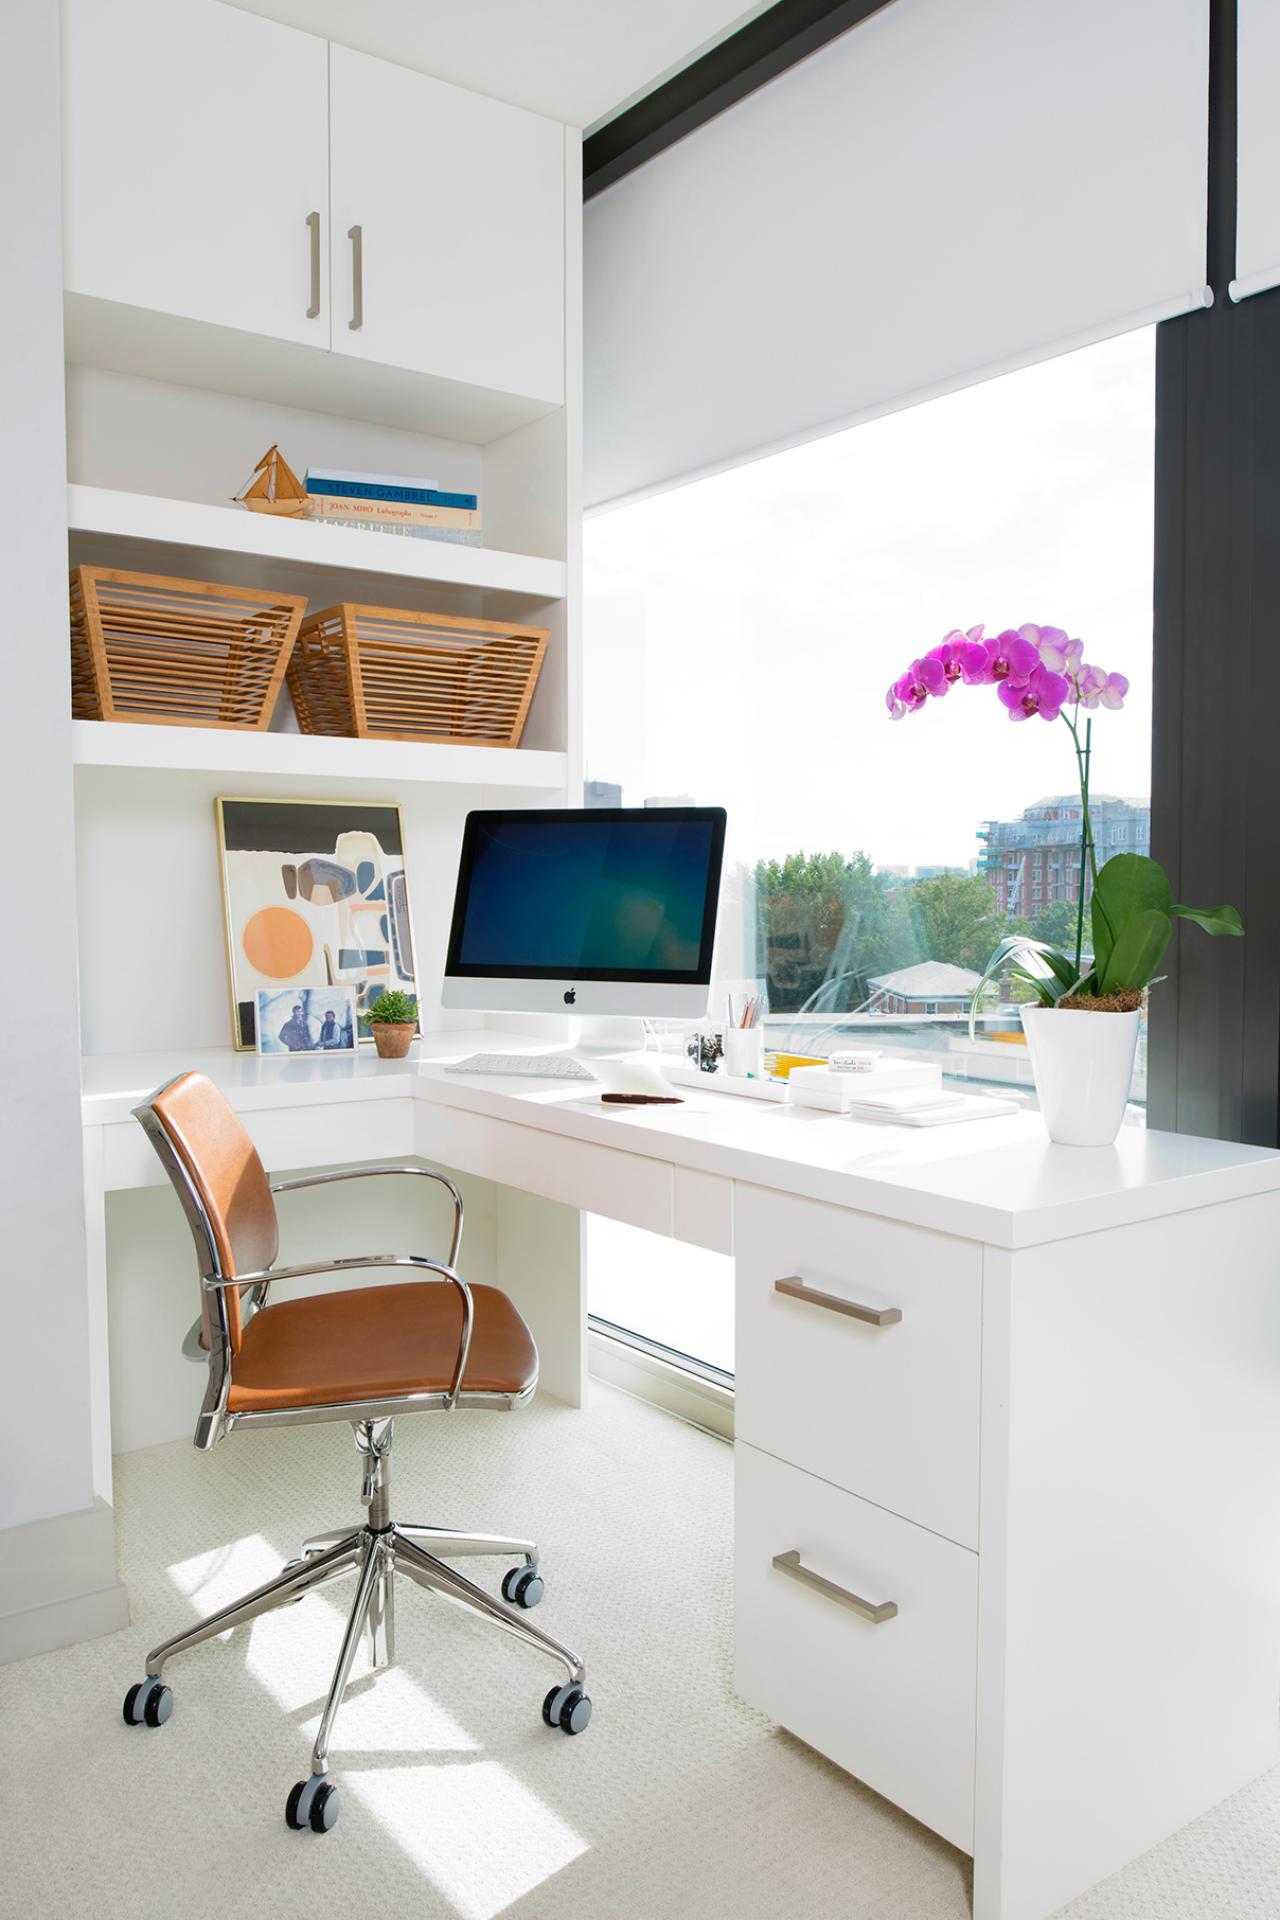 Creative Desk Storage Ideas When You Think All Is Lost – The